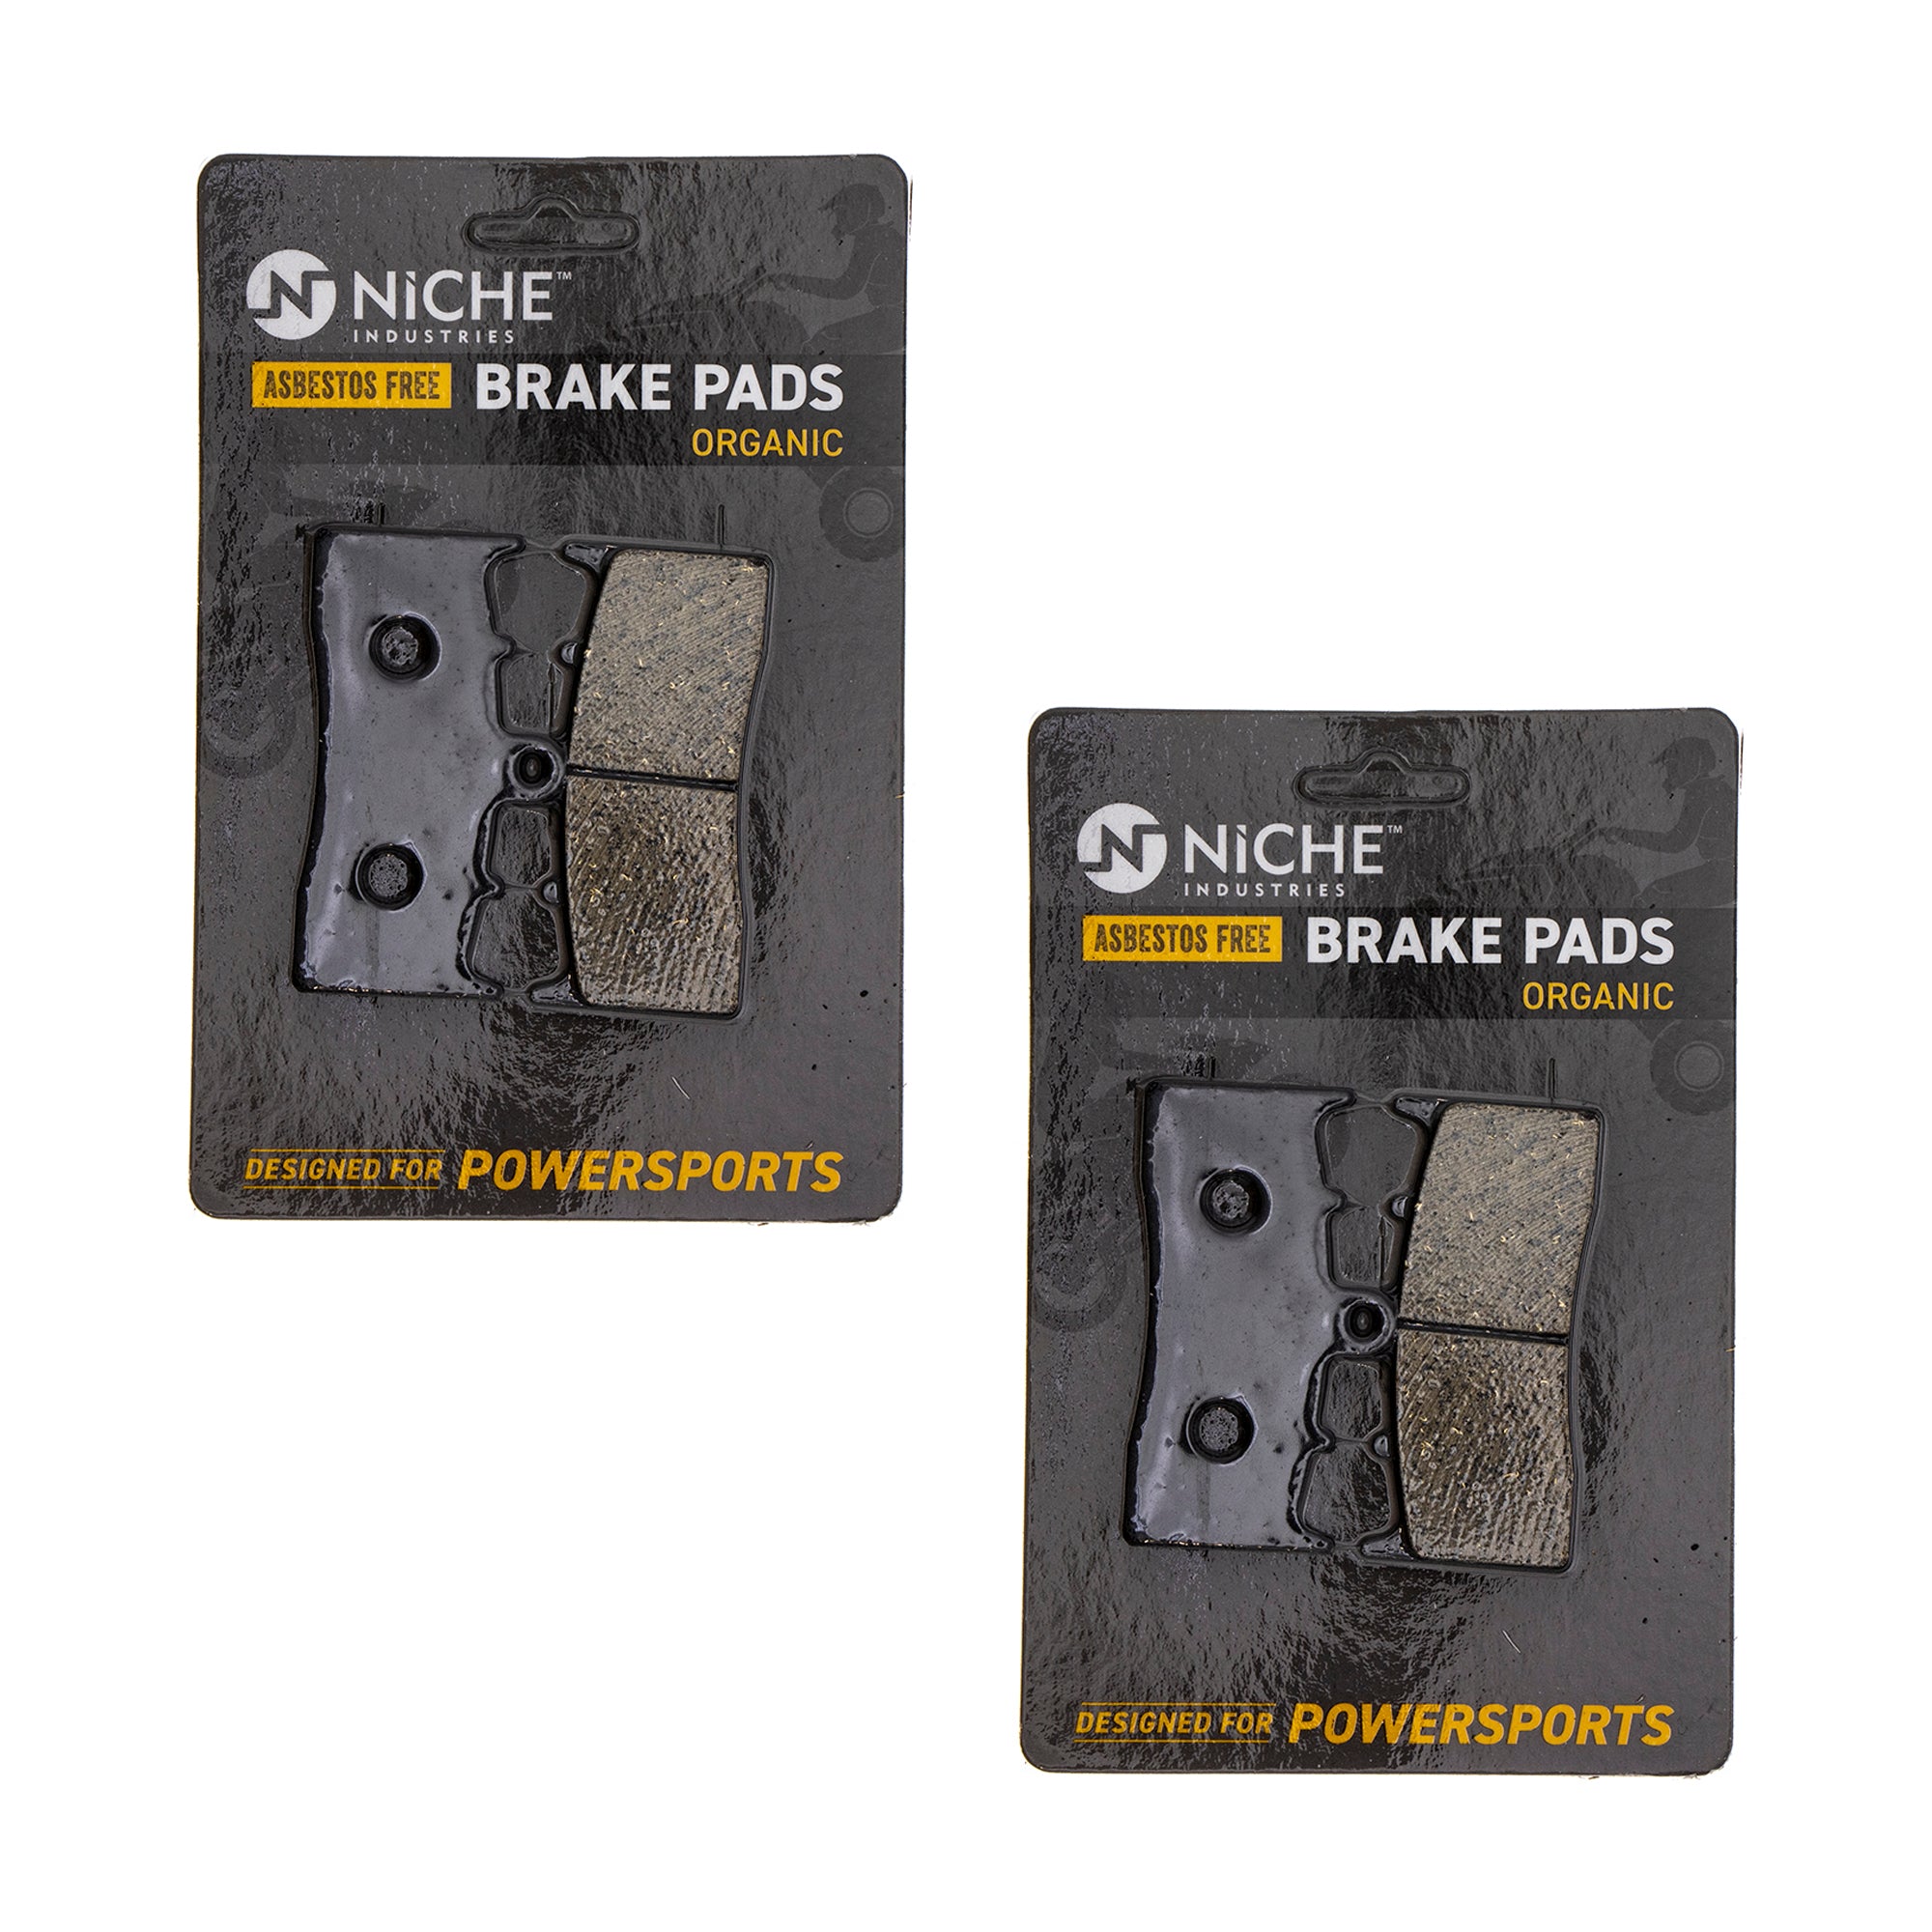 NICHE MK1002804 Brake Pad Kit Front/Rear for zOTHER BMW R1200CL